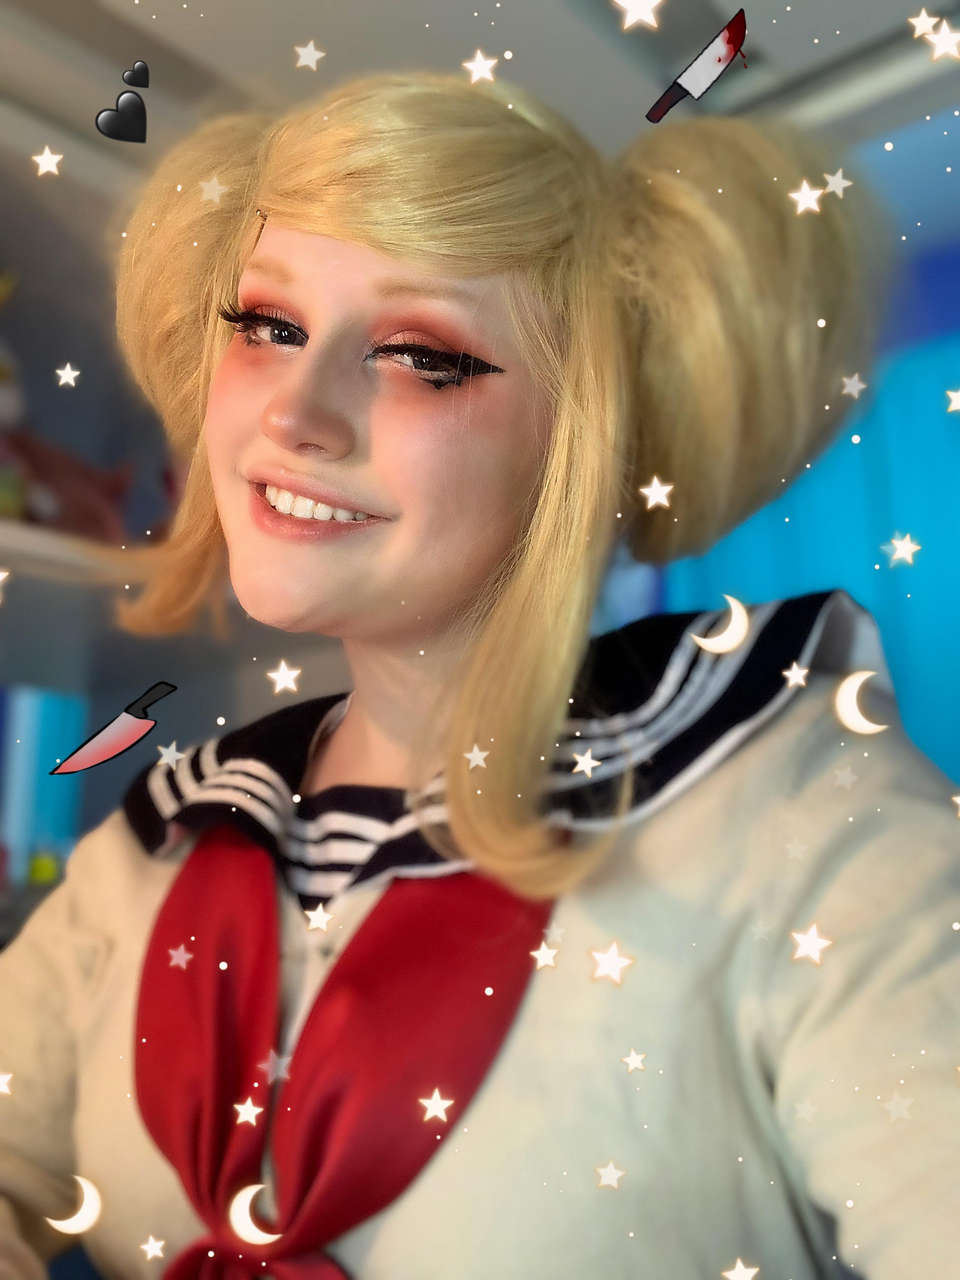 Toga Himiko From My Hero Academia I Did Her Again A While Ago But I Honestly Love My Makeup Her